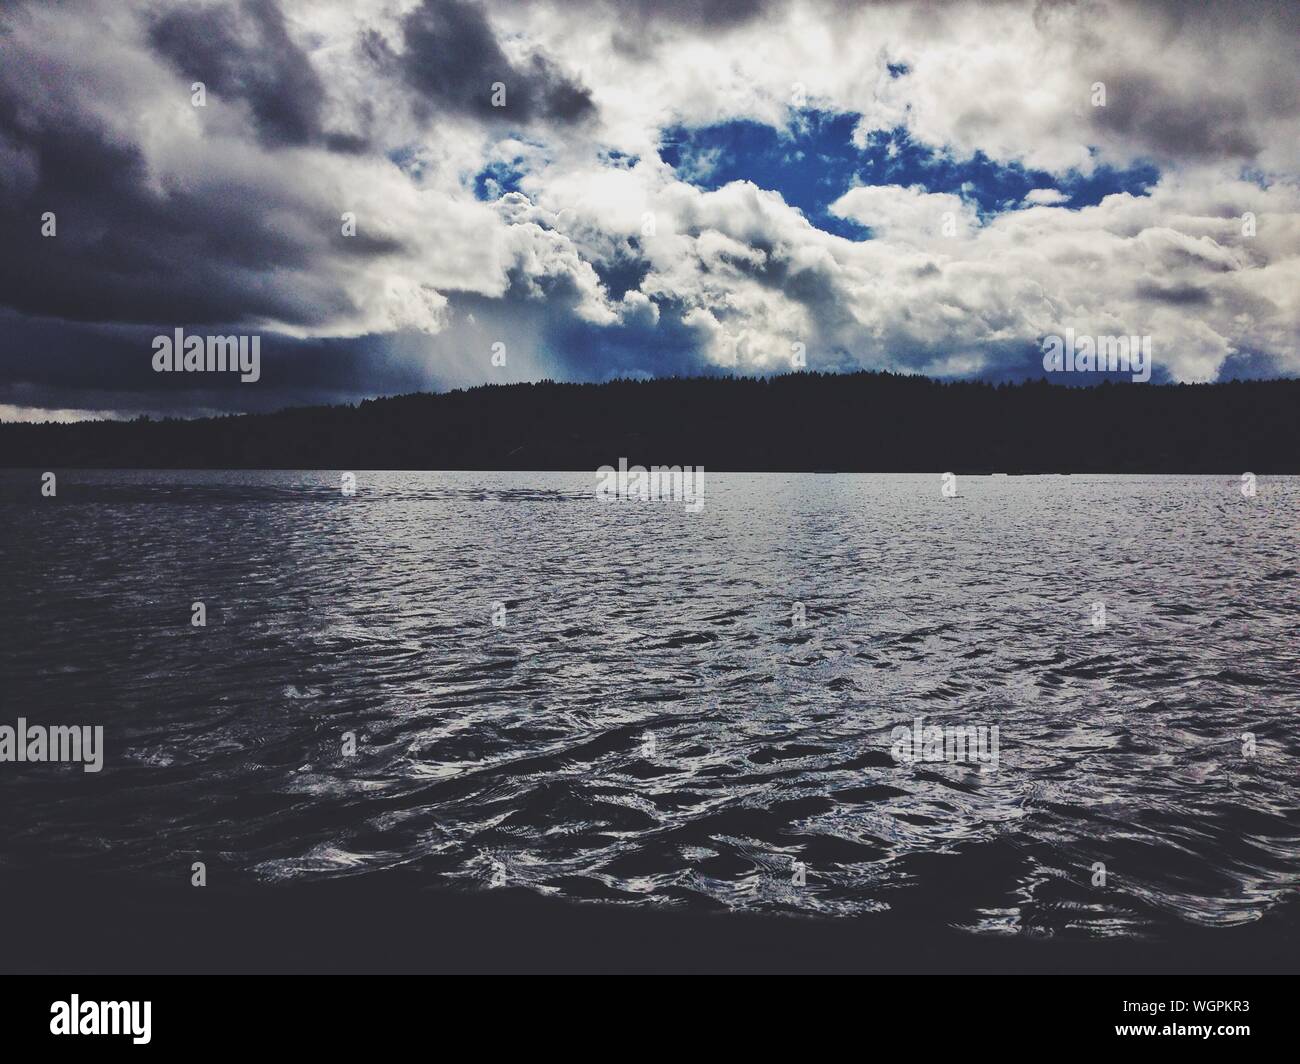 Choppy Waters On A Forest Lake With Menacing Clouds Stock Photo